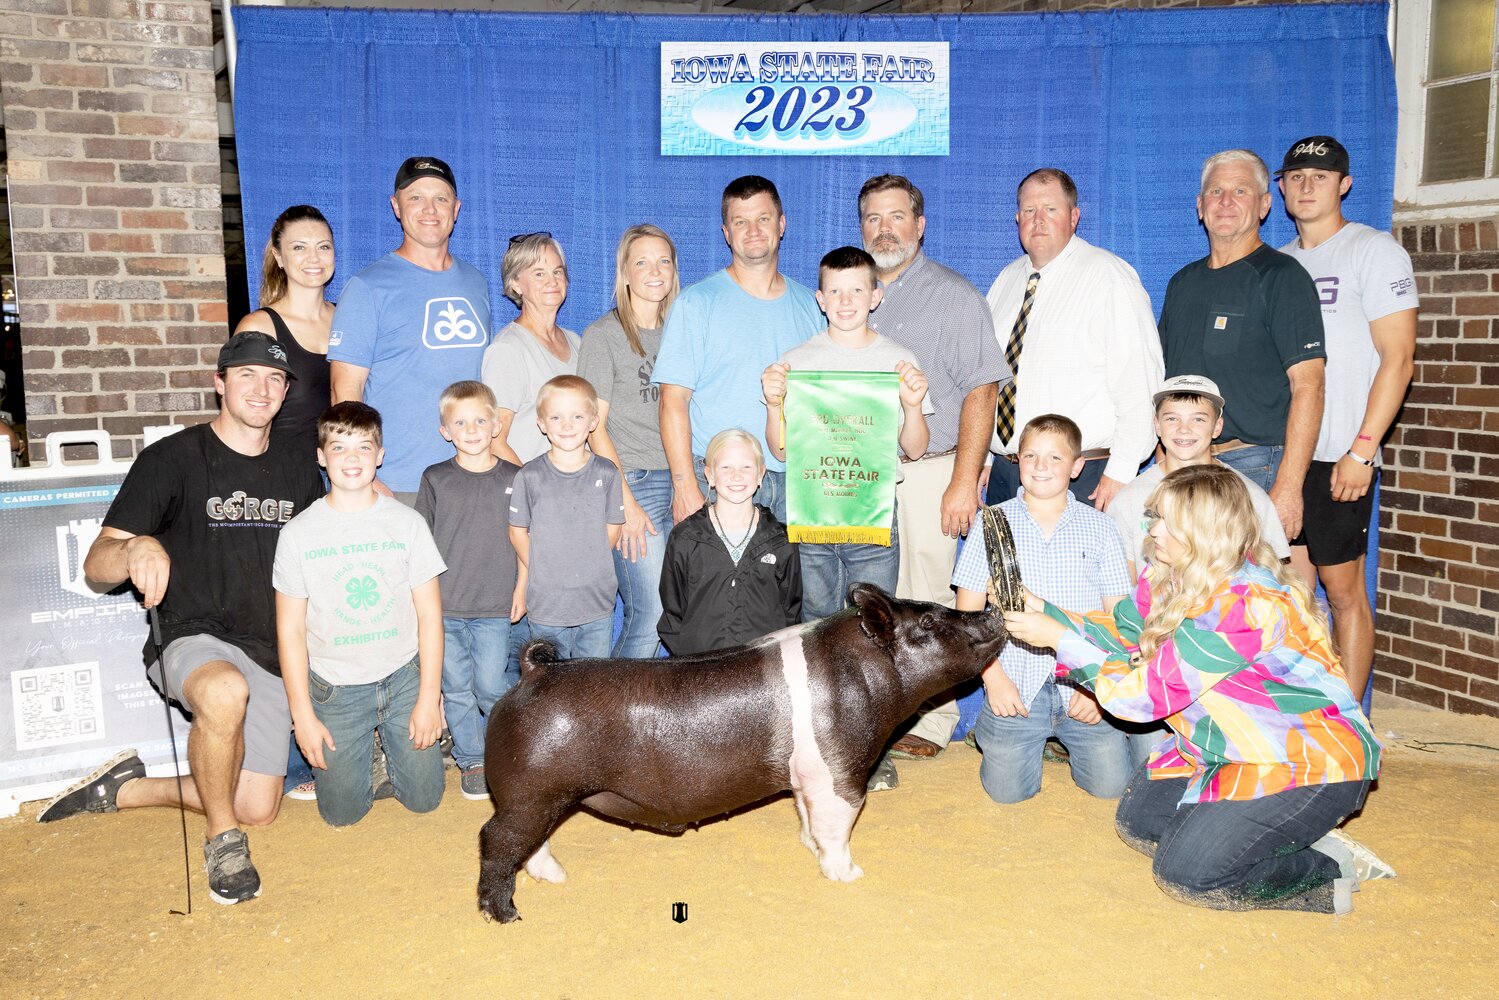 Nolan Schott of Riverside exhibited the Division 1 Champion 4-H Market Barrow and 3rd Overall Champion 4H Market Hog at the Iowa State Fair.  Nolan is a member of the Ramblin Recks & Rosies 4-H Club and is the son of David and Sherri Schott.